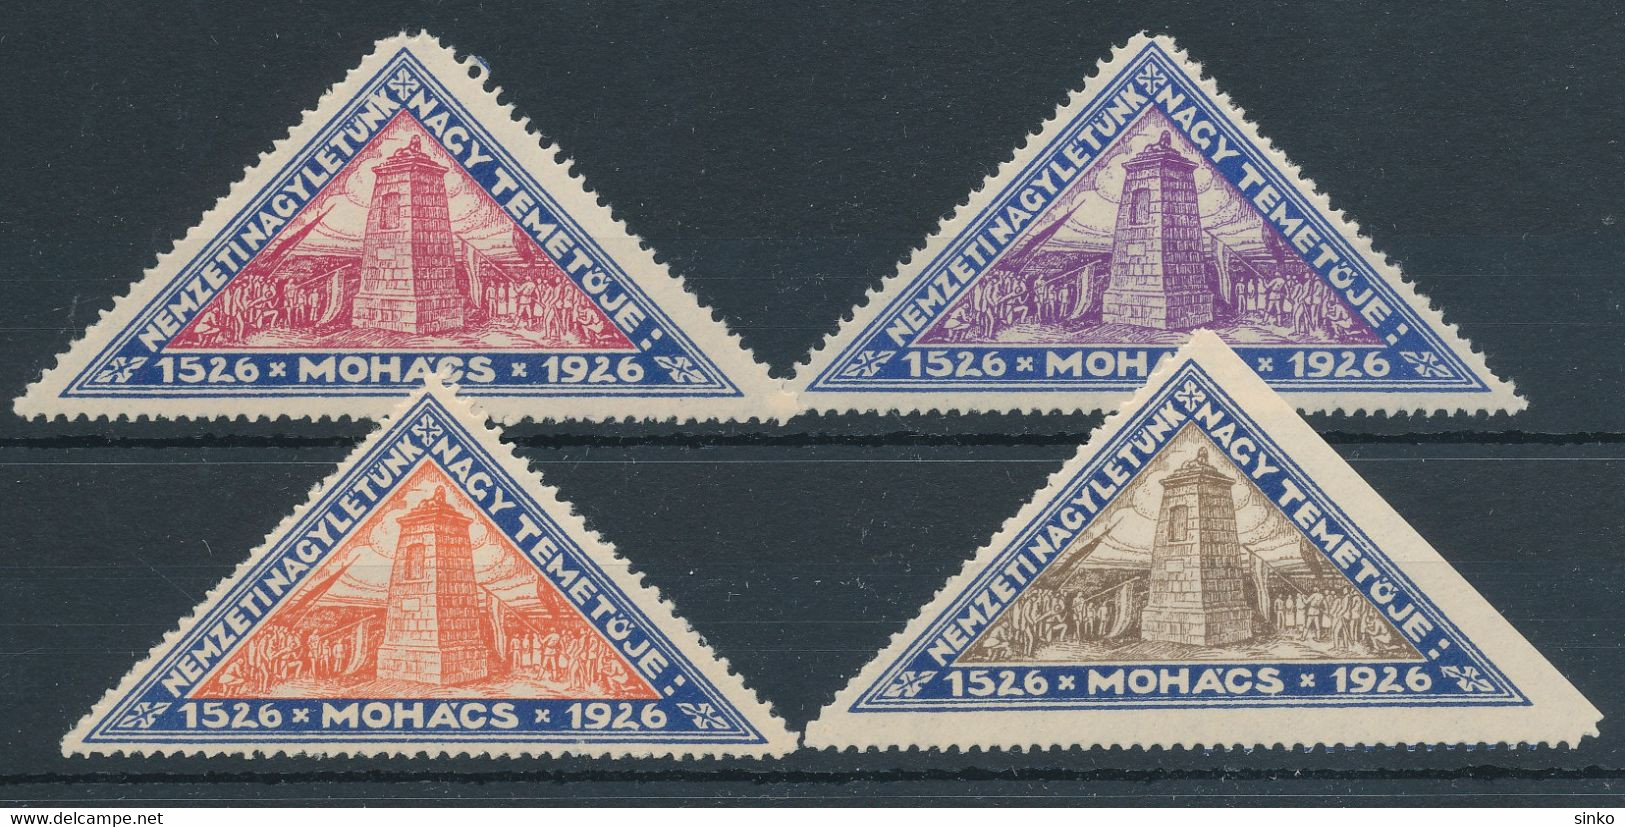 1926. Mohacs "The Great Cemetery Of Our National Greatness" - Commemorative Sheets